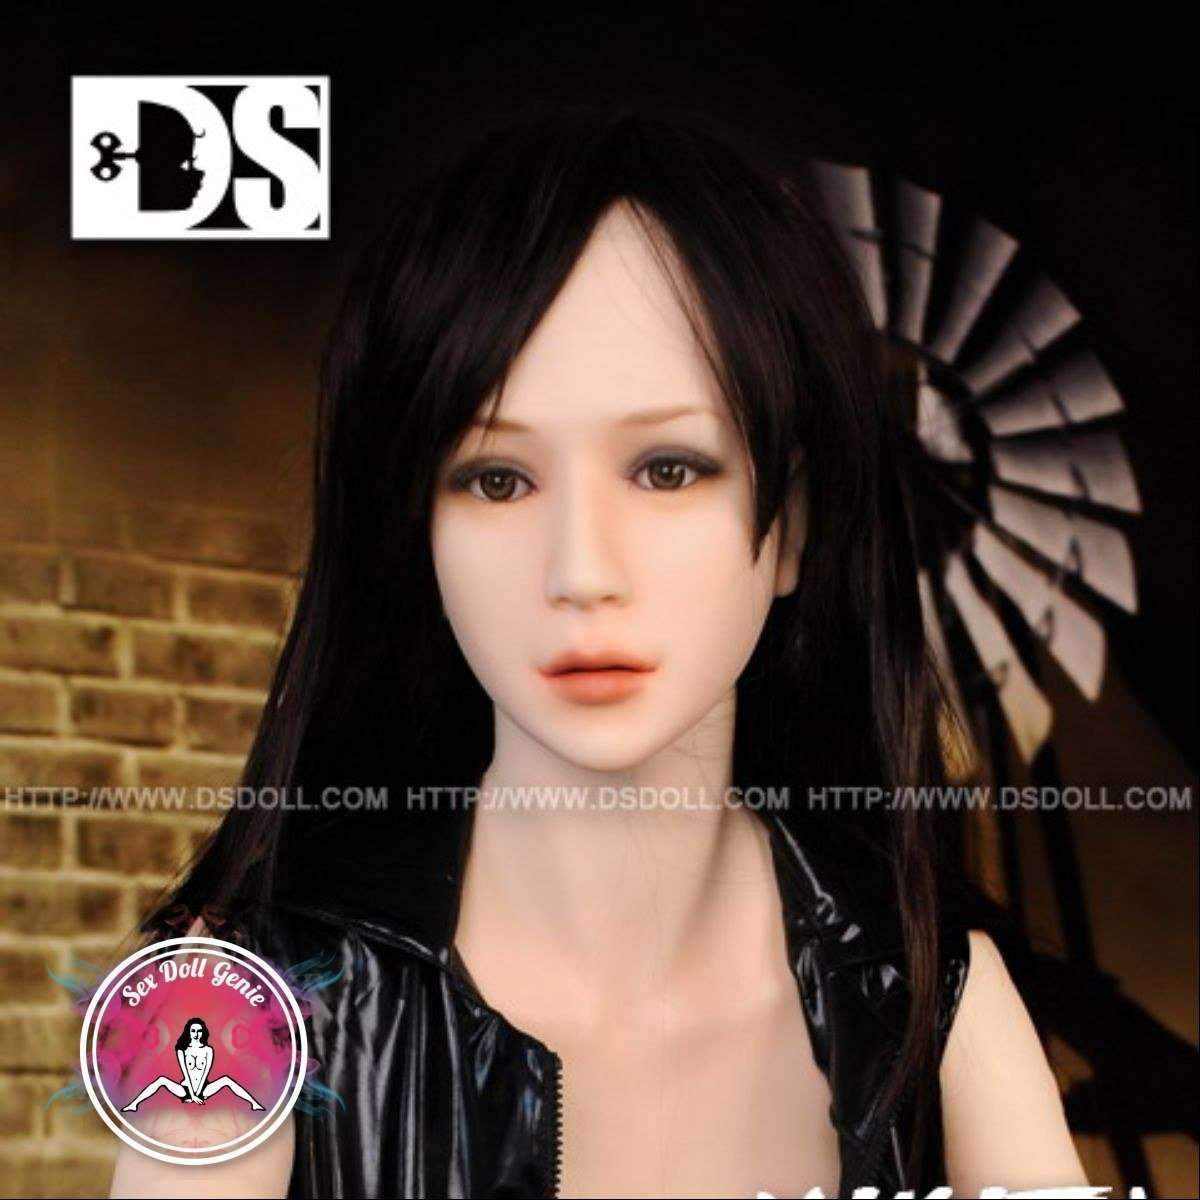 DS Doll - 158cm - Hanna Head - Type 1 D Cup Silicone Doll-6